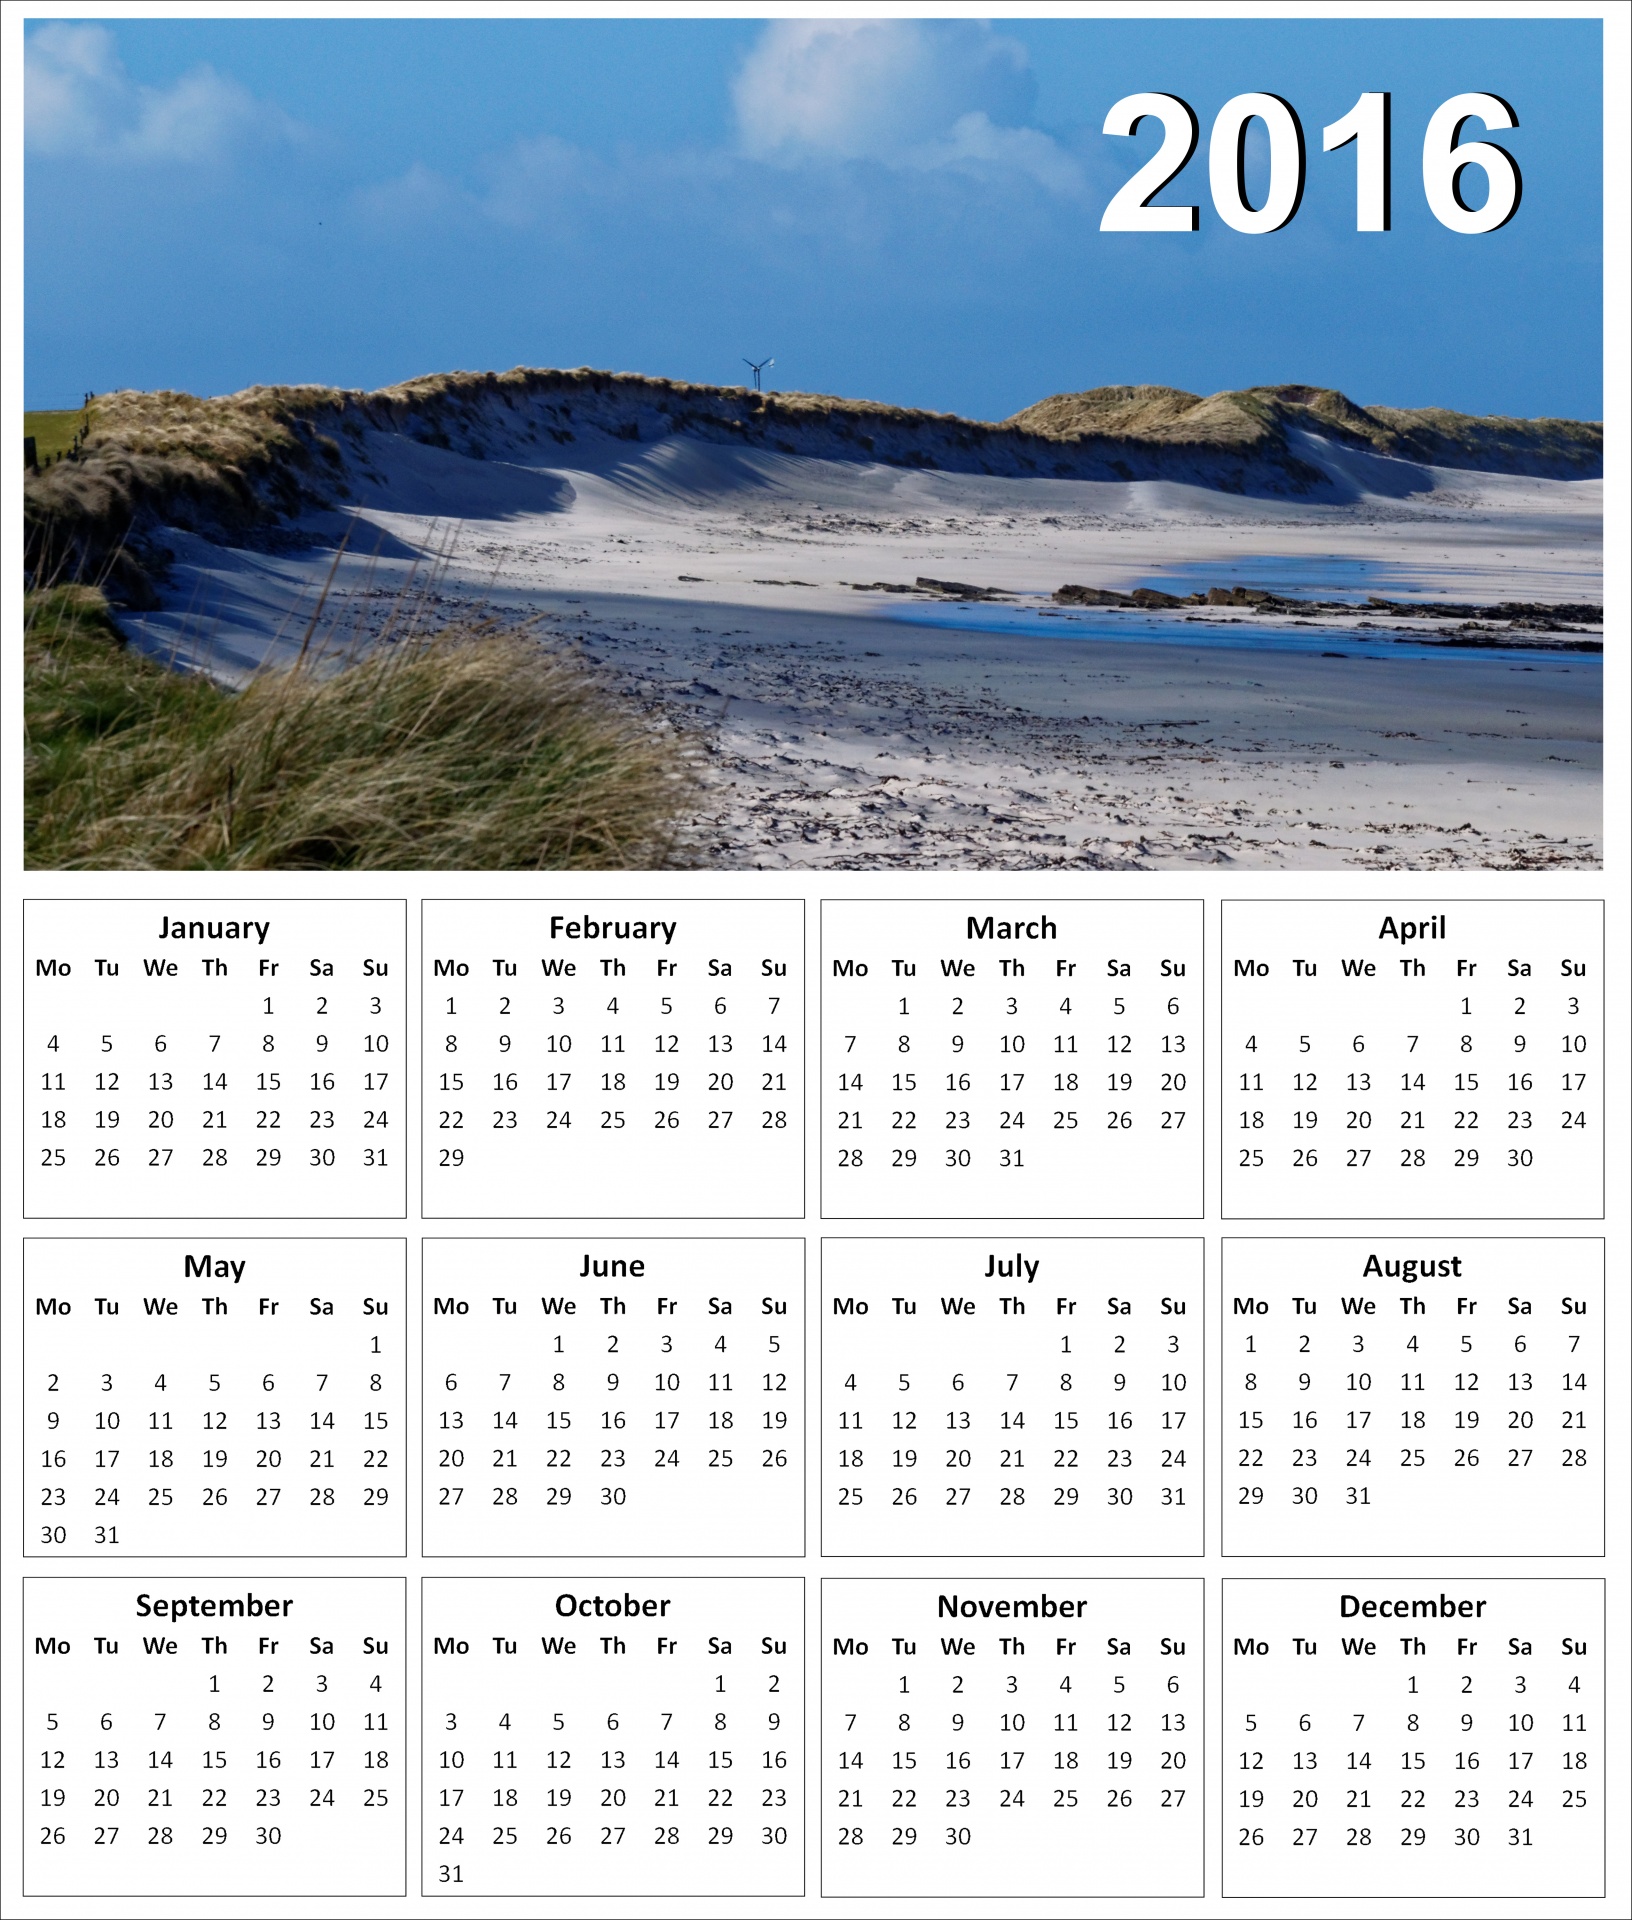 2016 Wall Calendar with a Sand Dunes Image